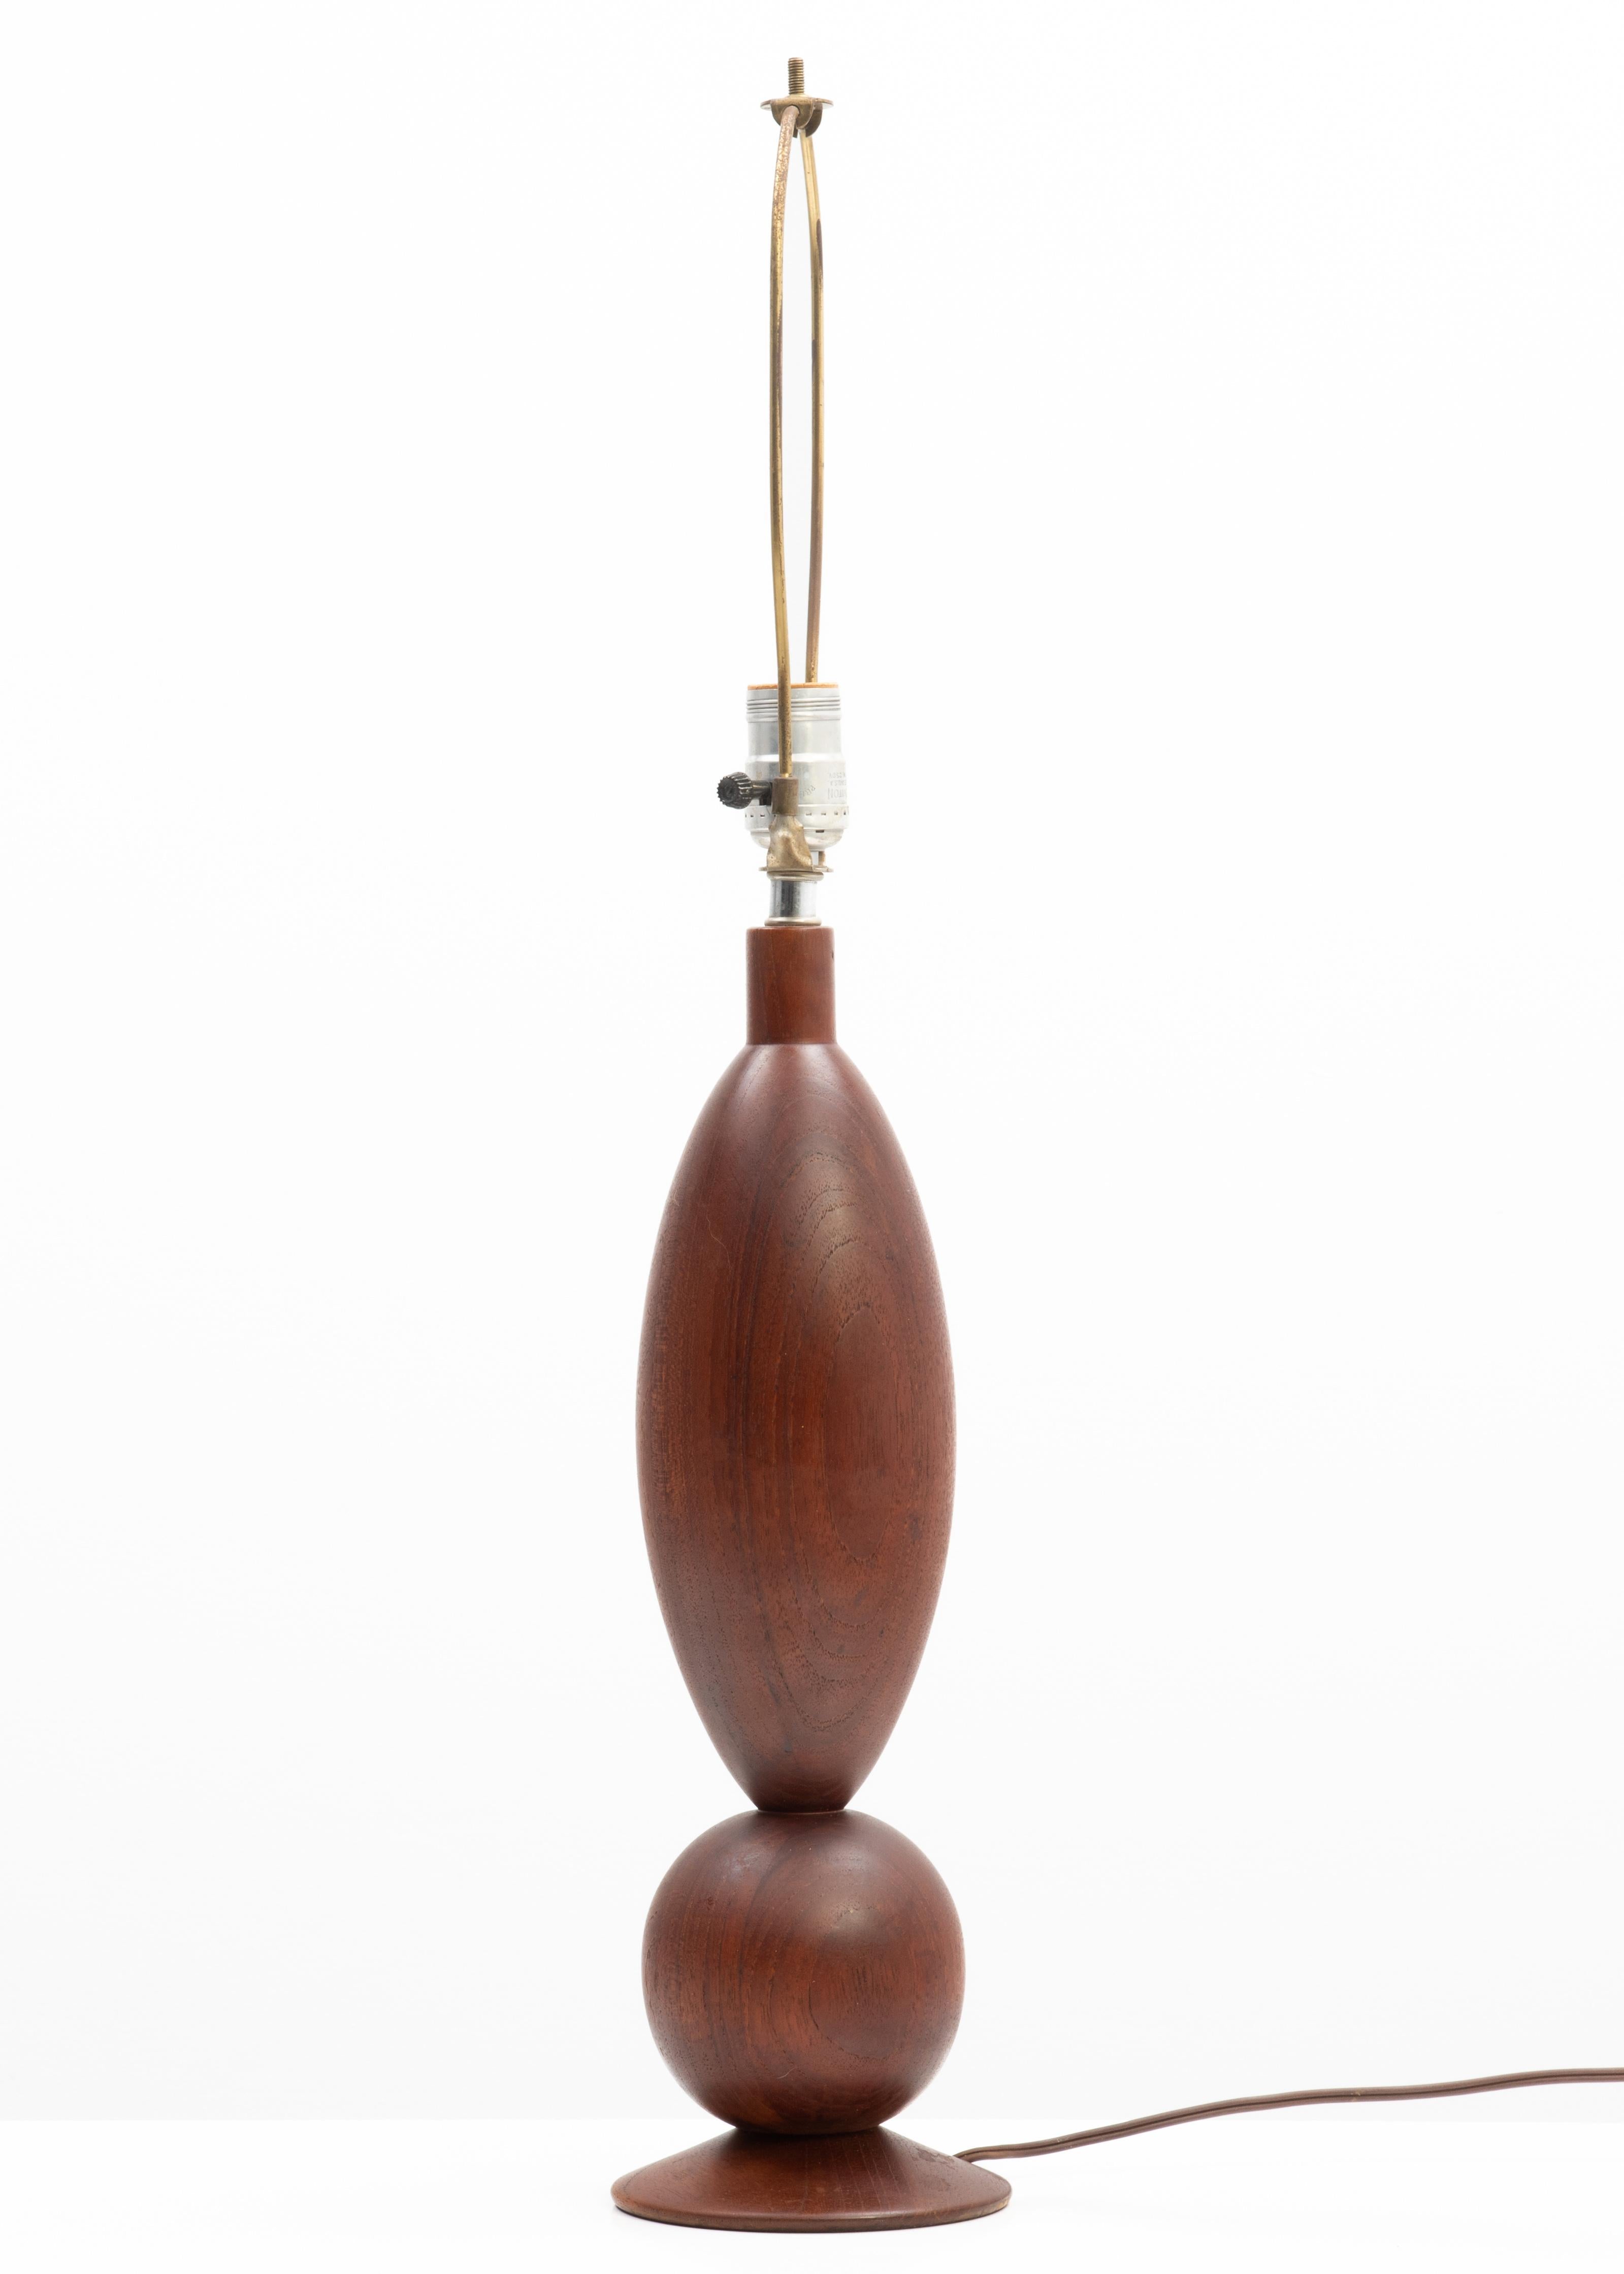 A sculptural solid teak table lamp in the manner of ESA. Made in Denmark or Sweden, 1970s. The wood section is 17.25” tall.